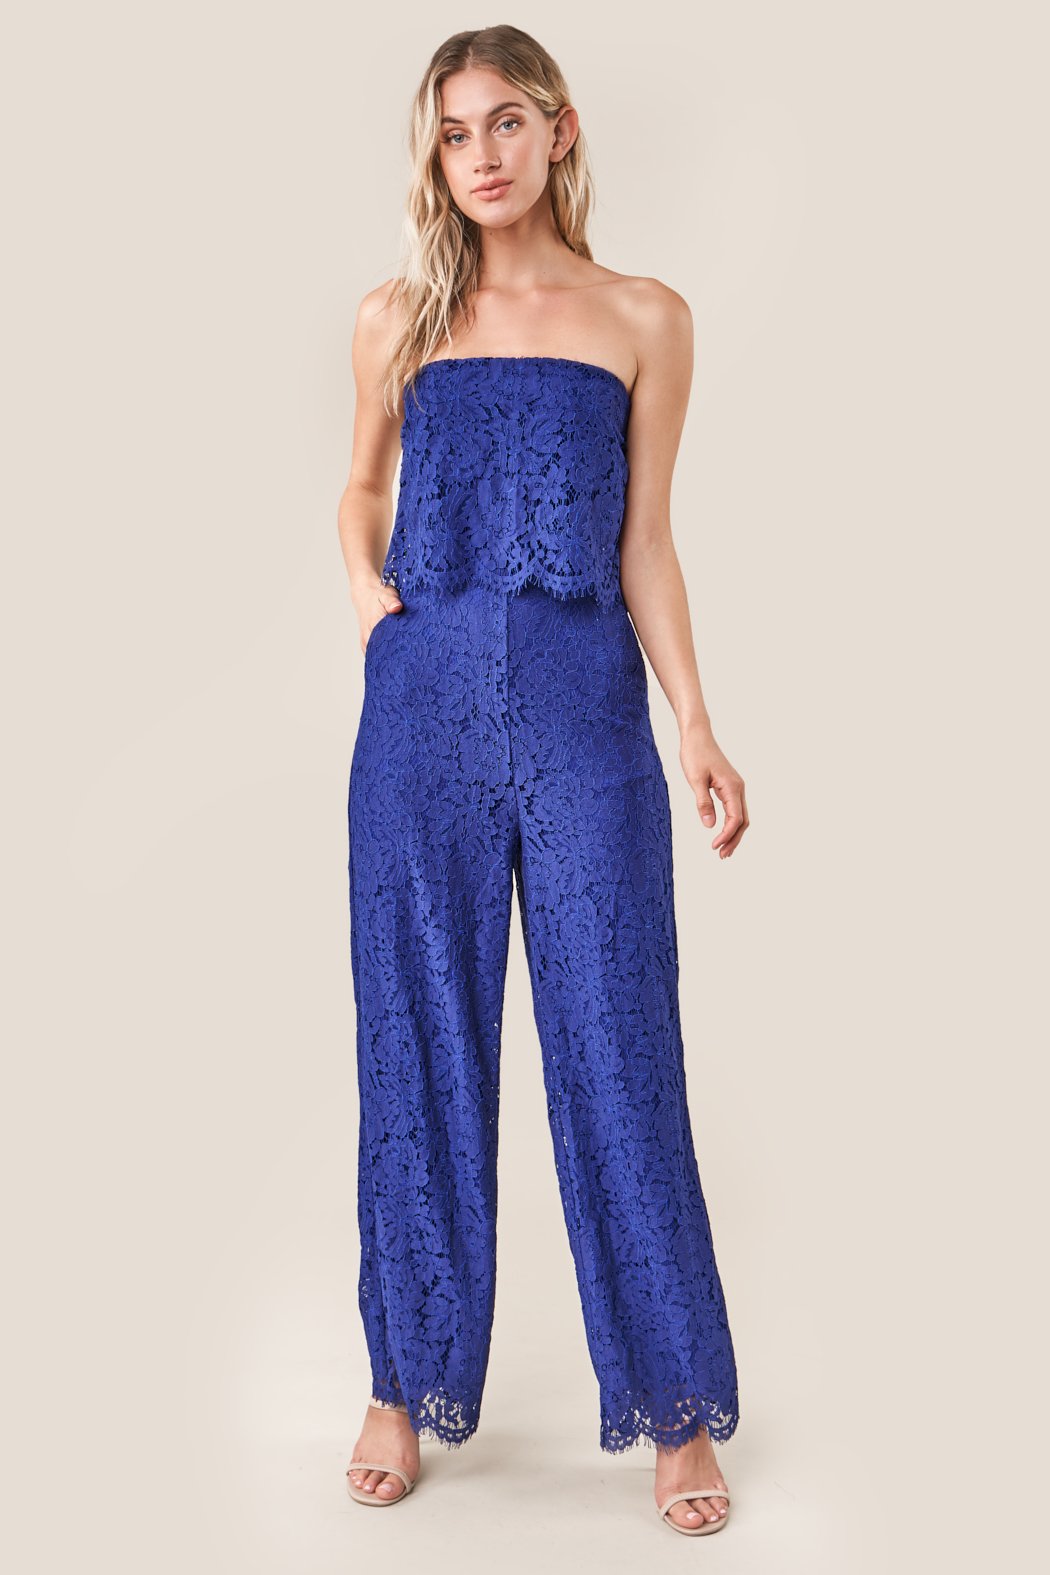 Lust For Love Strapless Lace Jumpsuit – Sugarlips